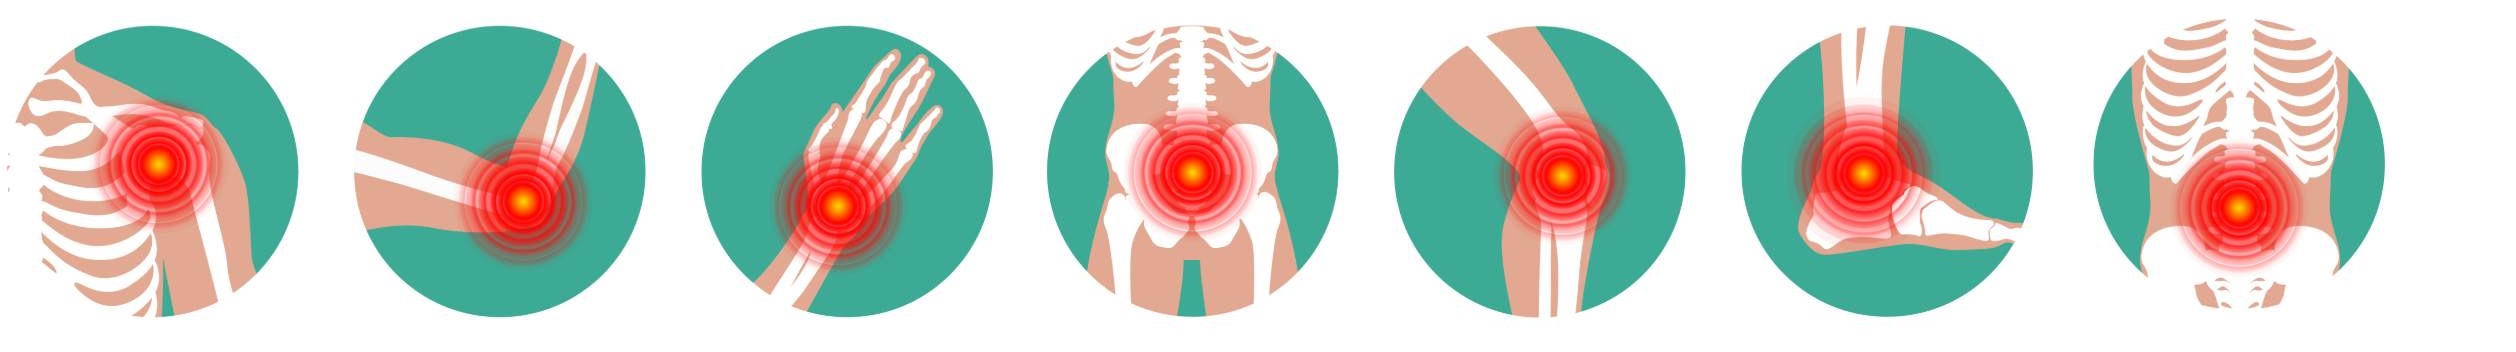 Icons showing different body parts with bone issues